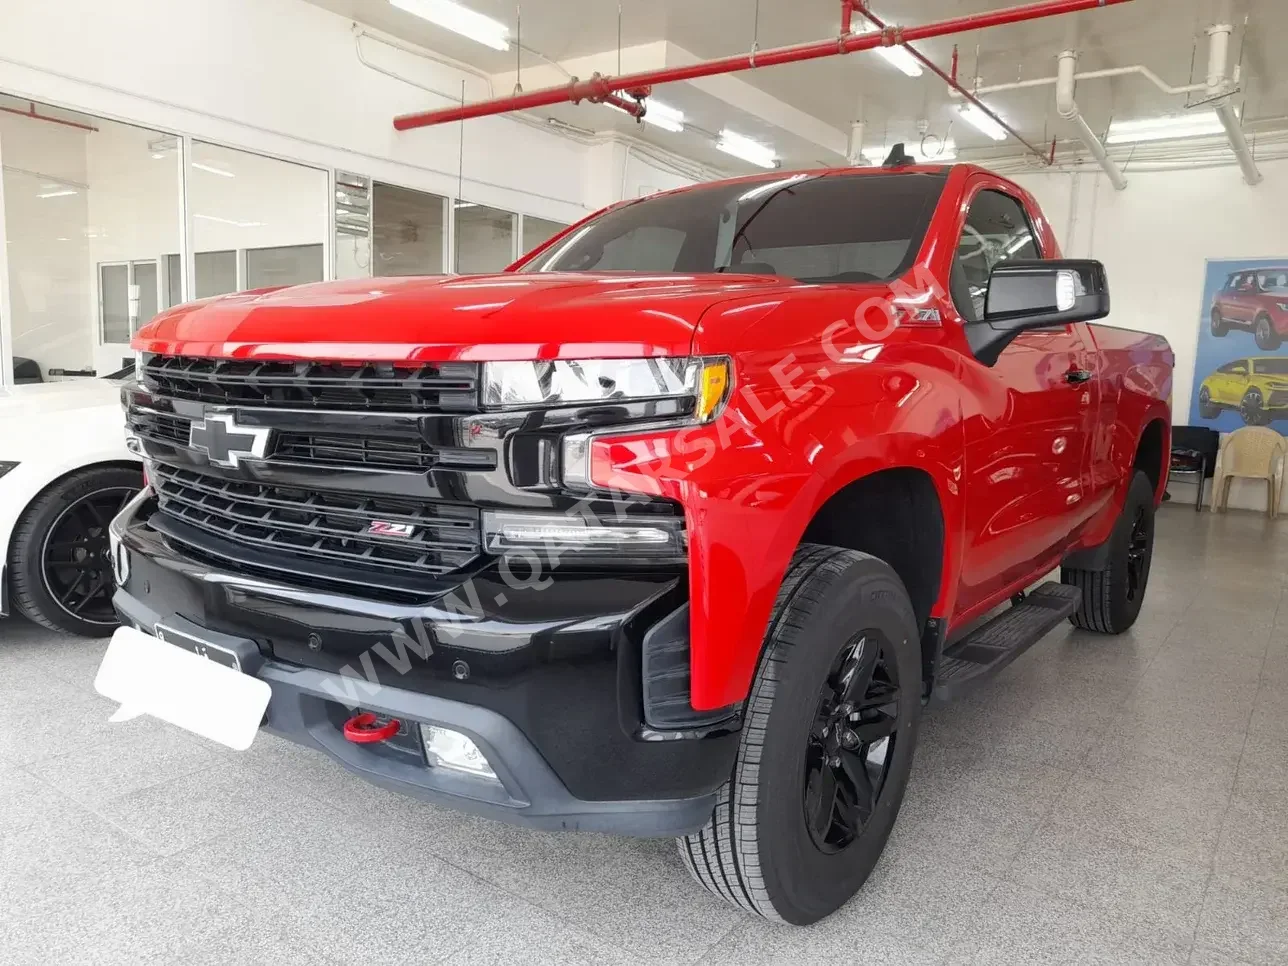 Chevrolet  Silverado  Trail Boss  2021  Automatic  27,000 Km  8 Cylinder  Four Wheel Drive (4WD)  Pick Up  Red  With Warranty